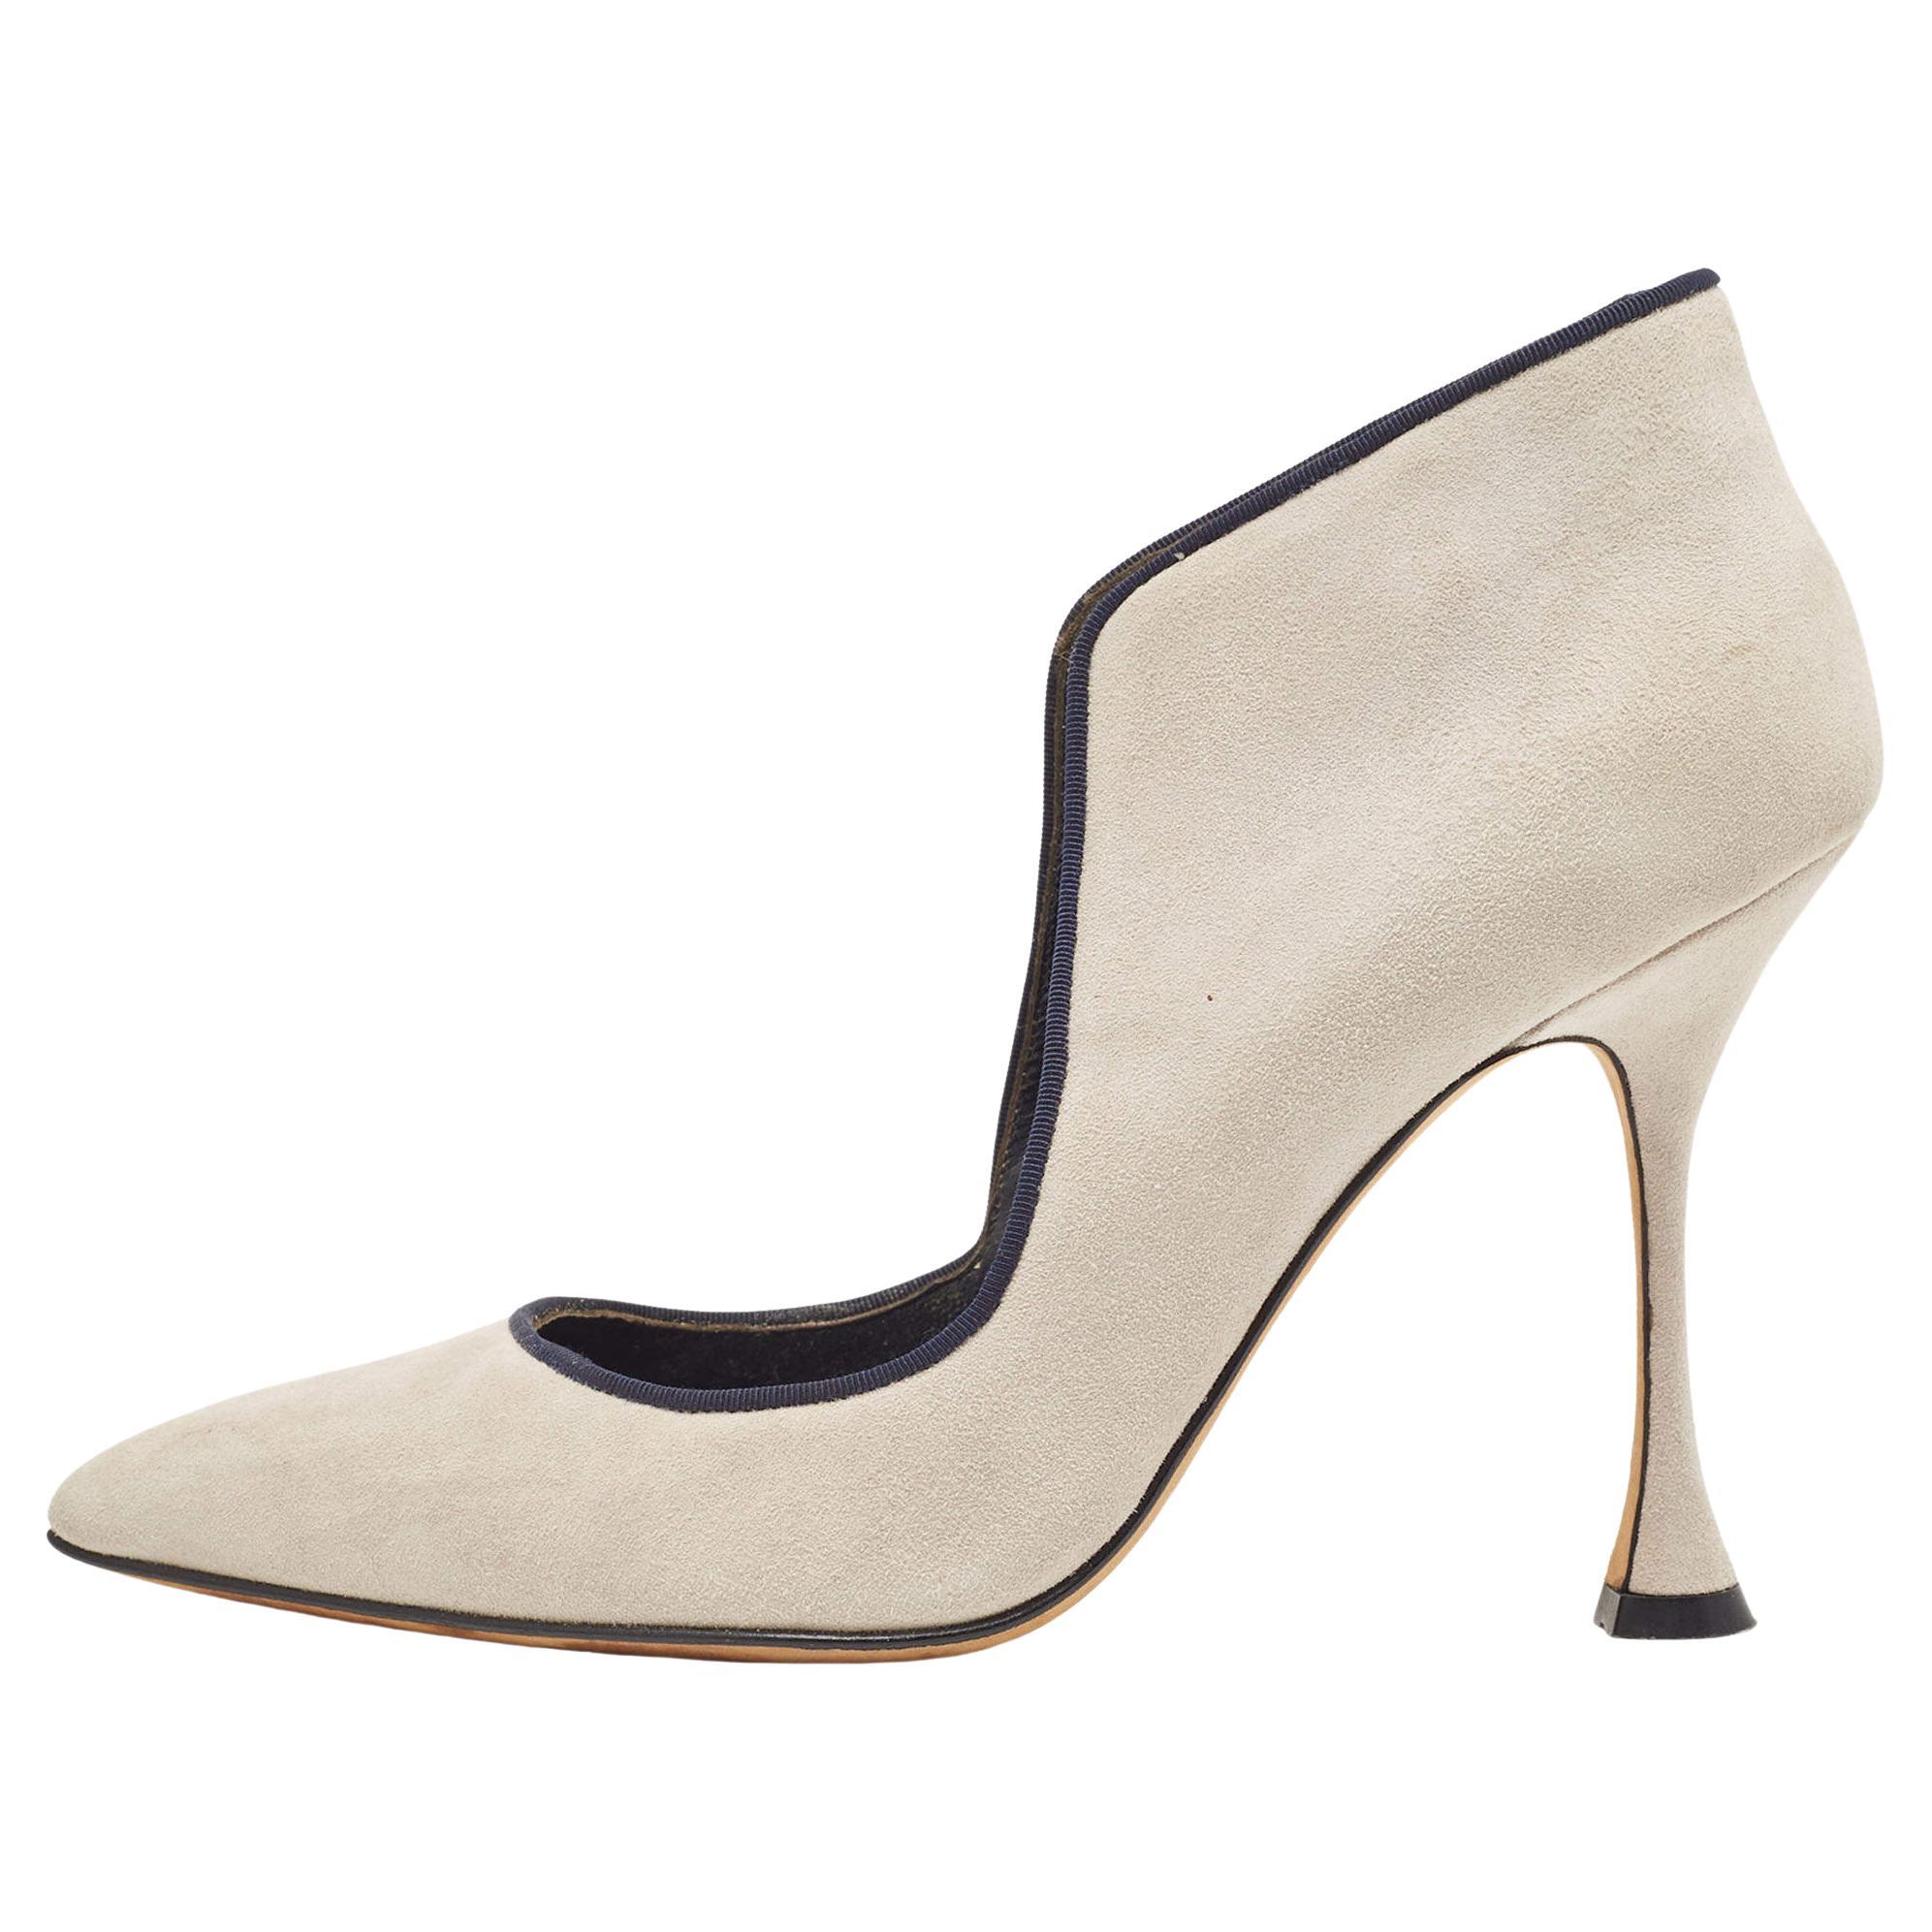 Manolo Blahnik Grey Suede Pointed Toe Pumps Size 36.5 For Sale